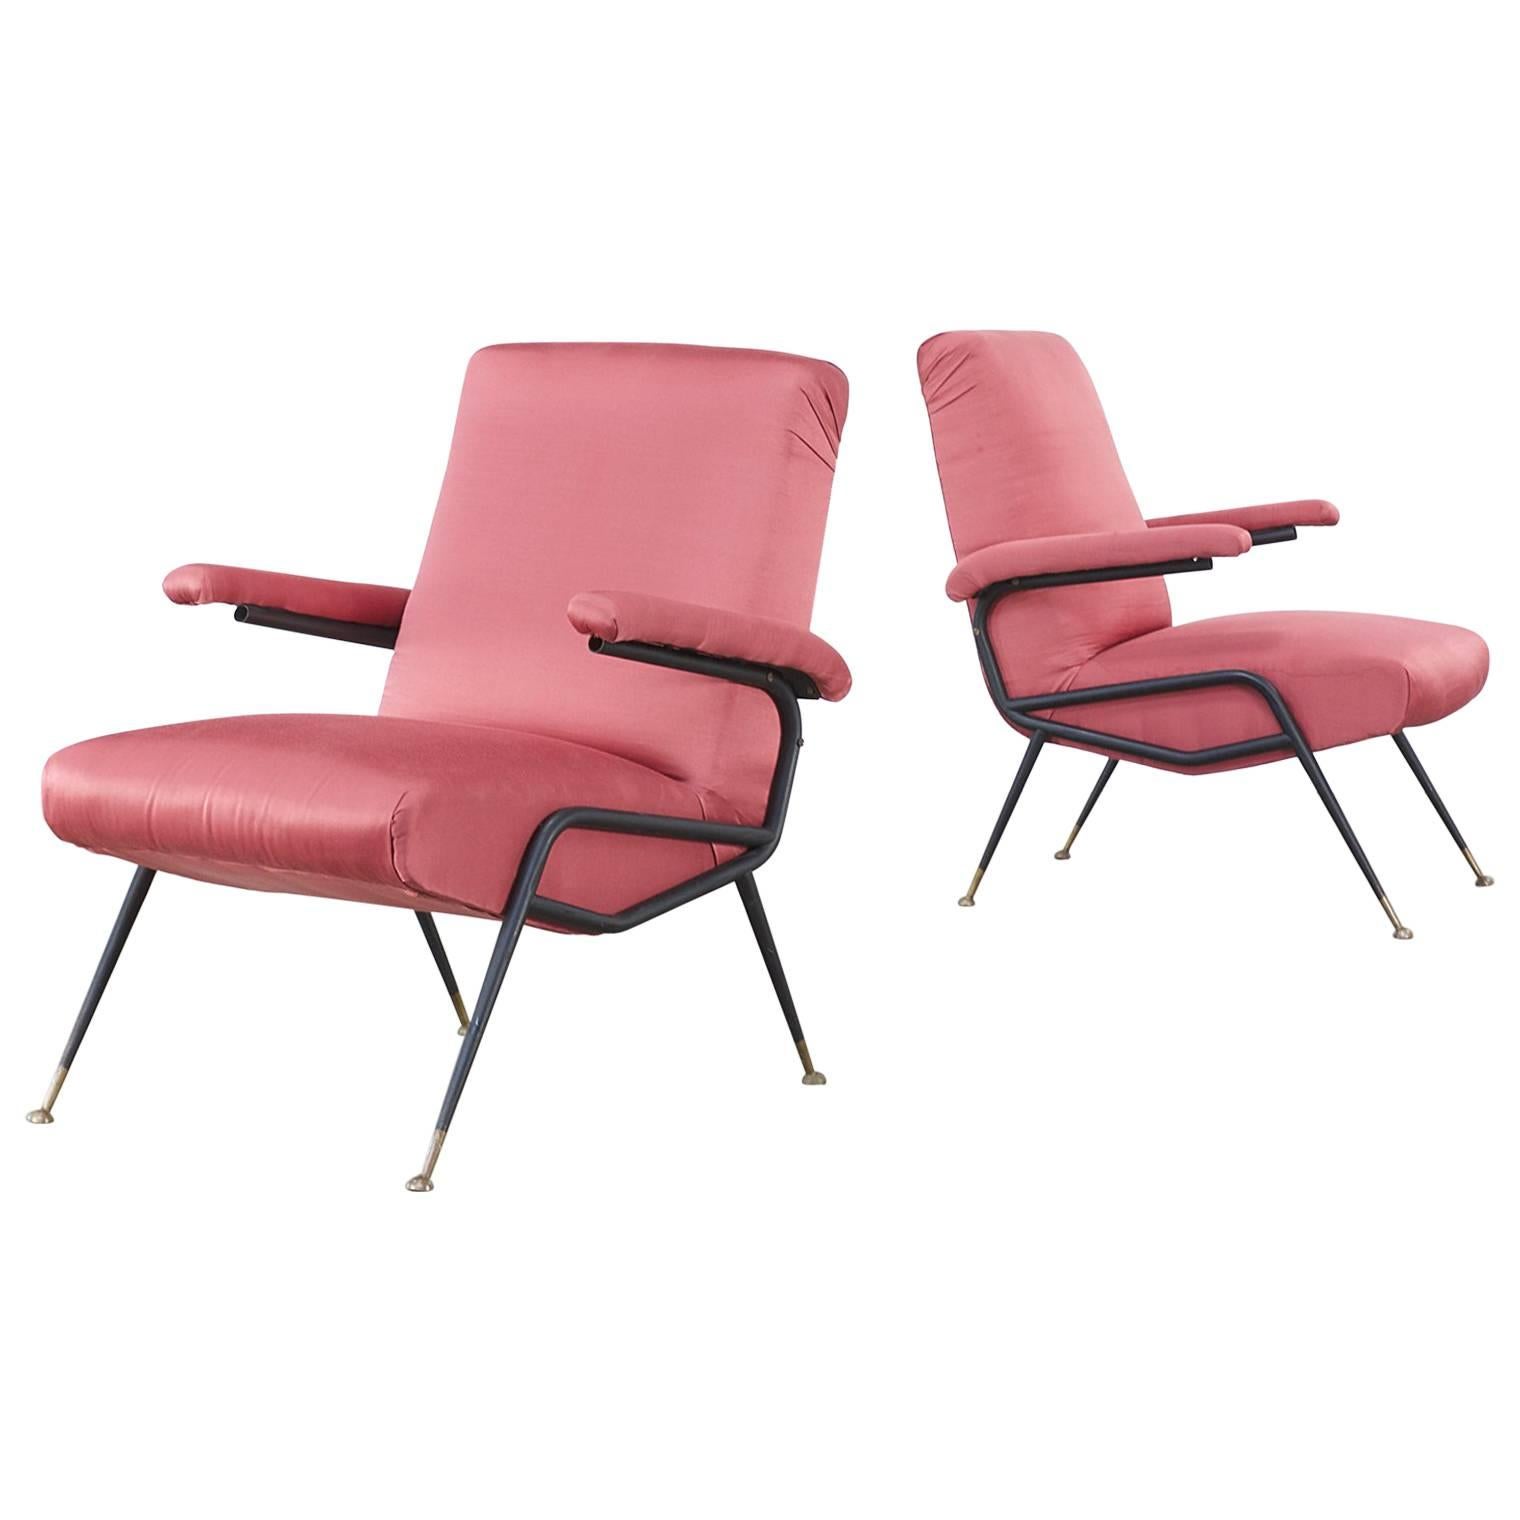 1960s Italian Design Chair in Old Red Fabric, Set of Two For Sale